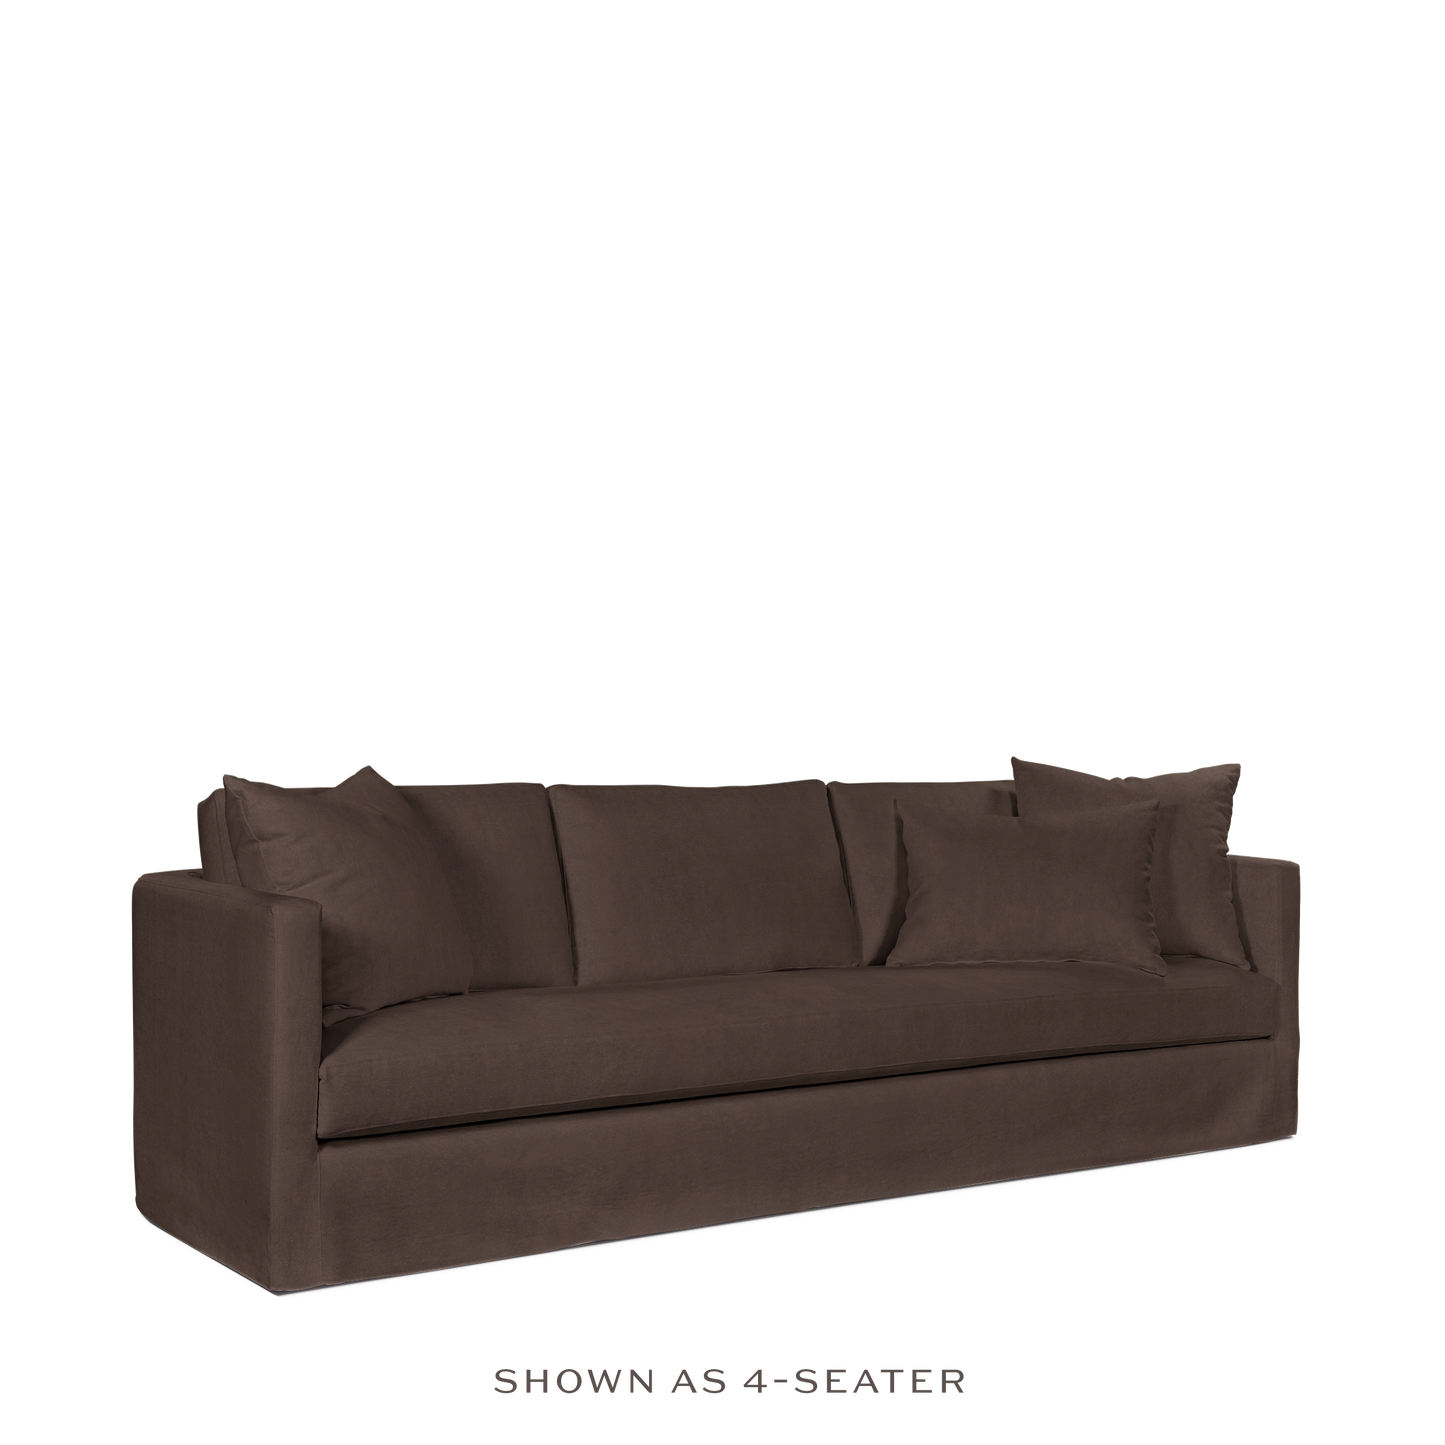 NIDO 2,5-seater sofa with brown textile 